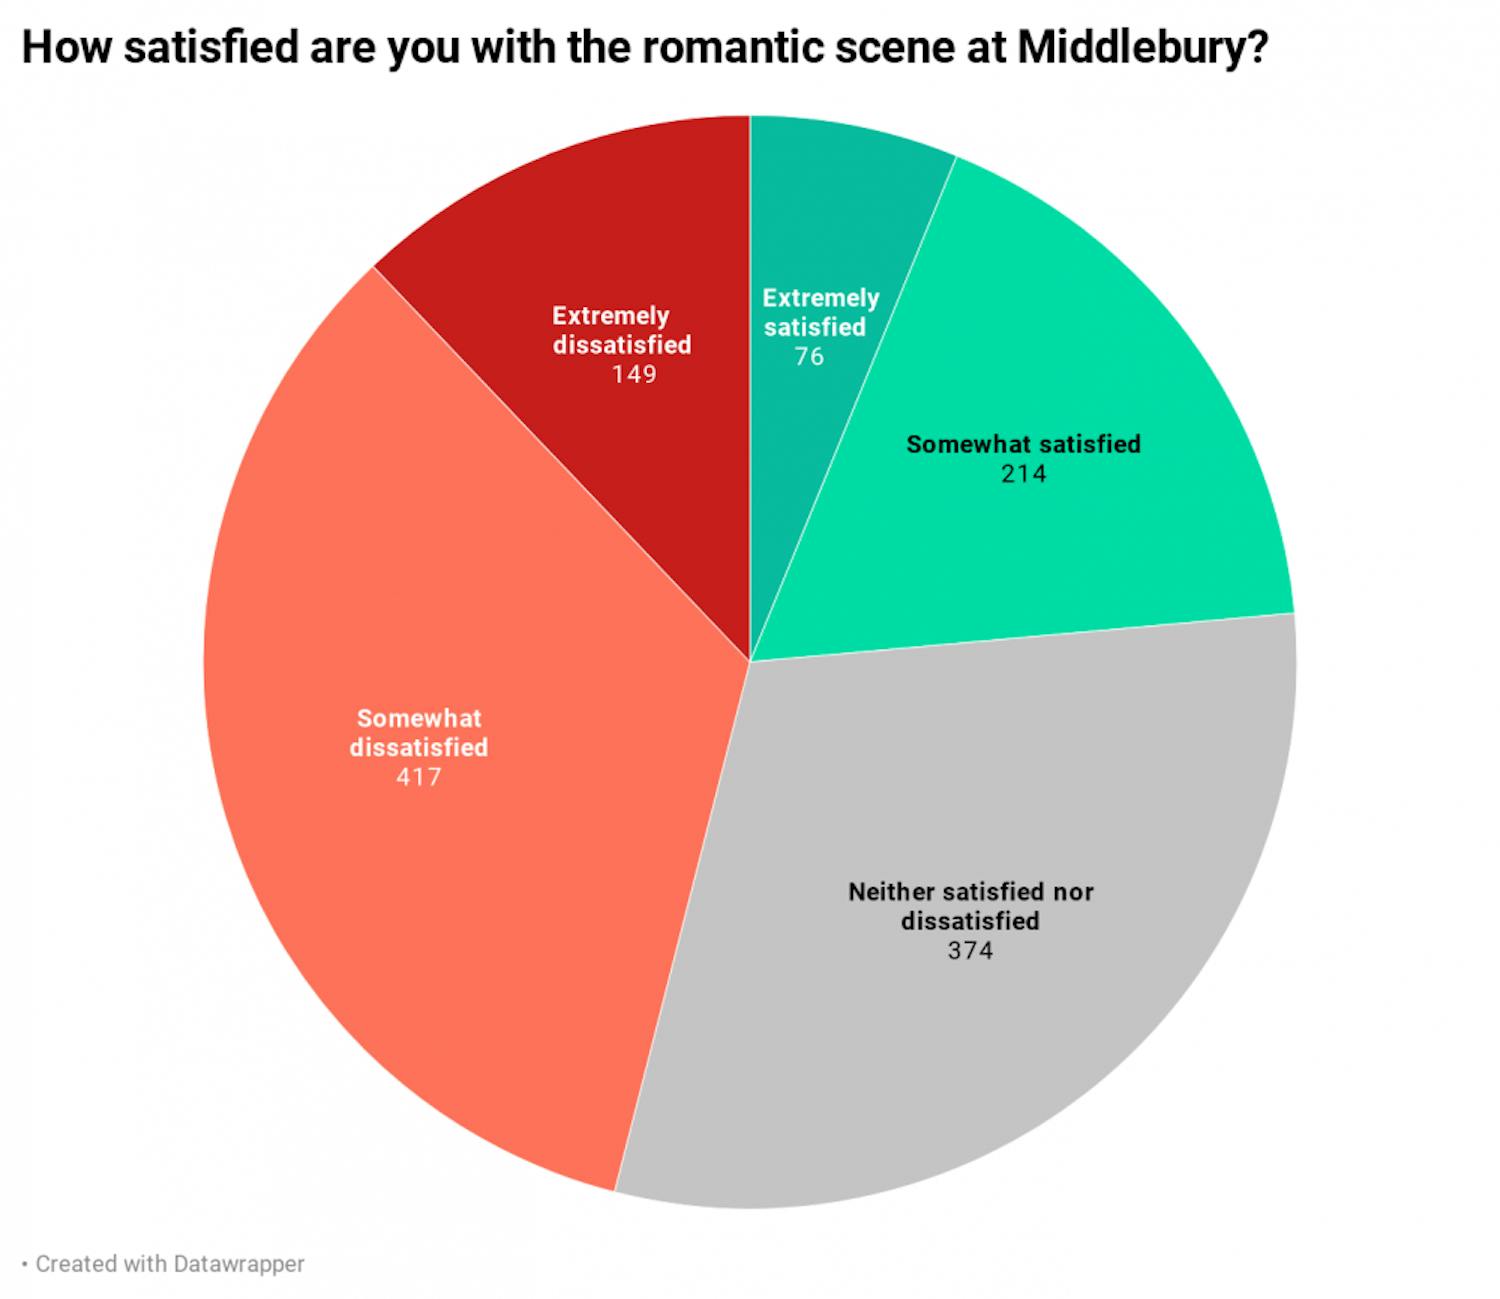 BISK0-how-satisfied-are-you-with-the-romantic-scene-at-middlebury-